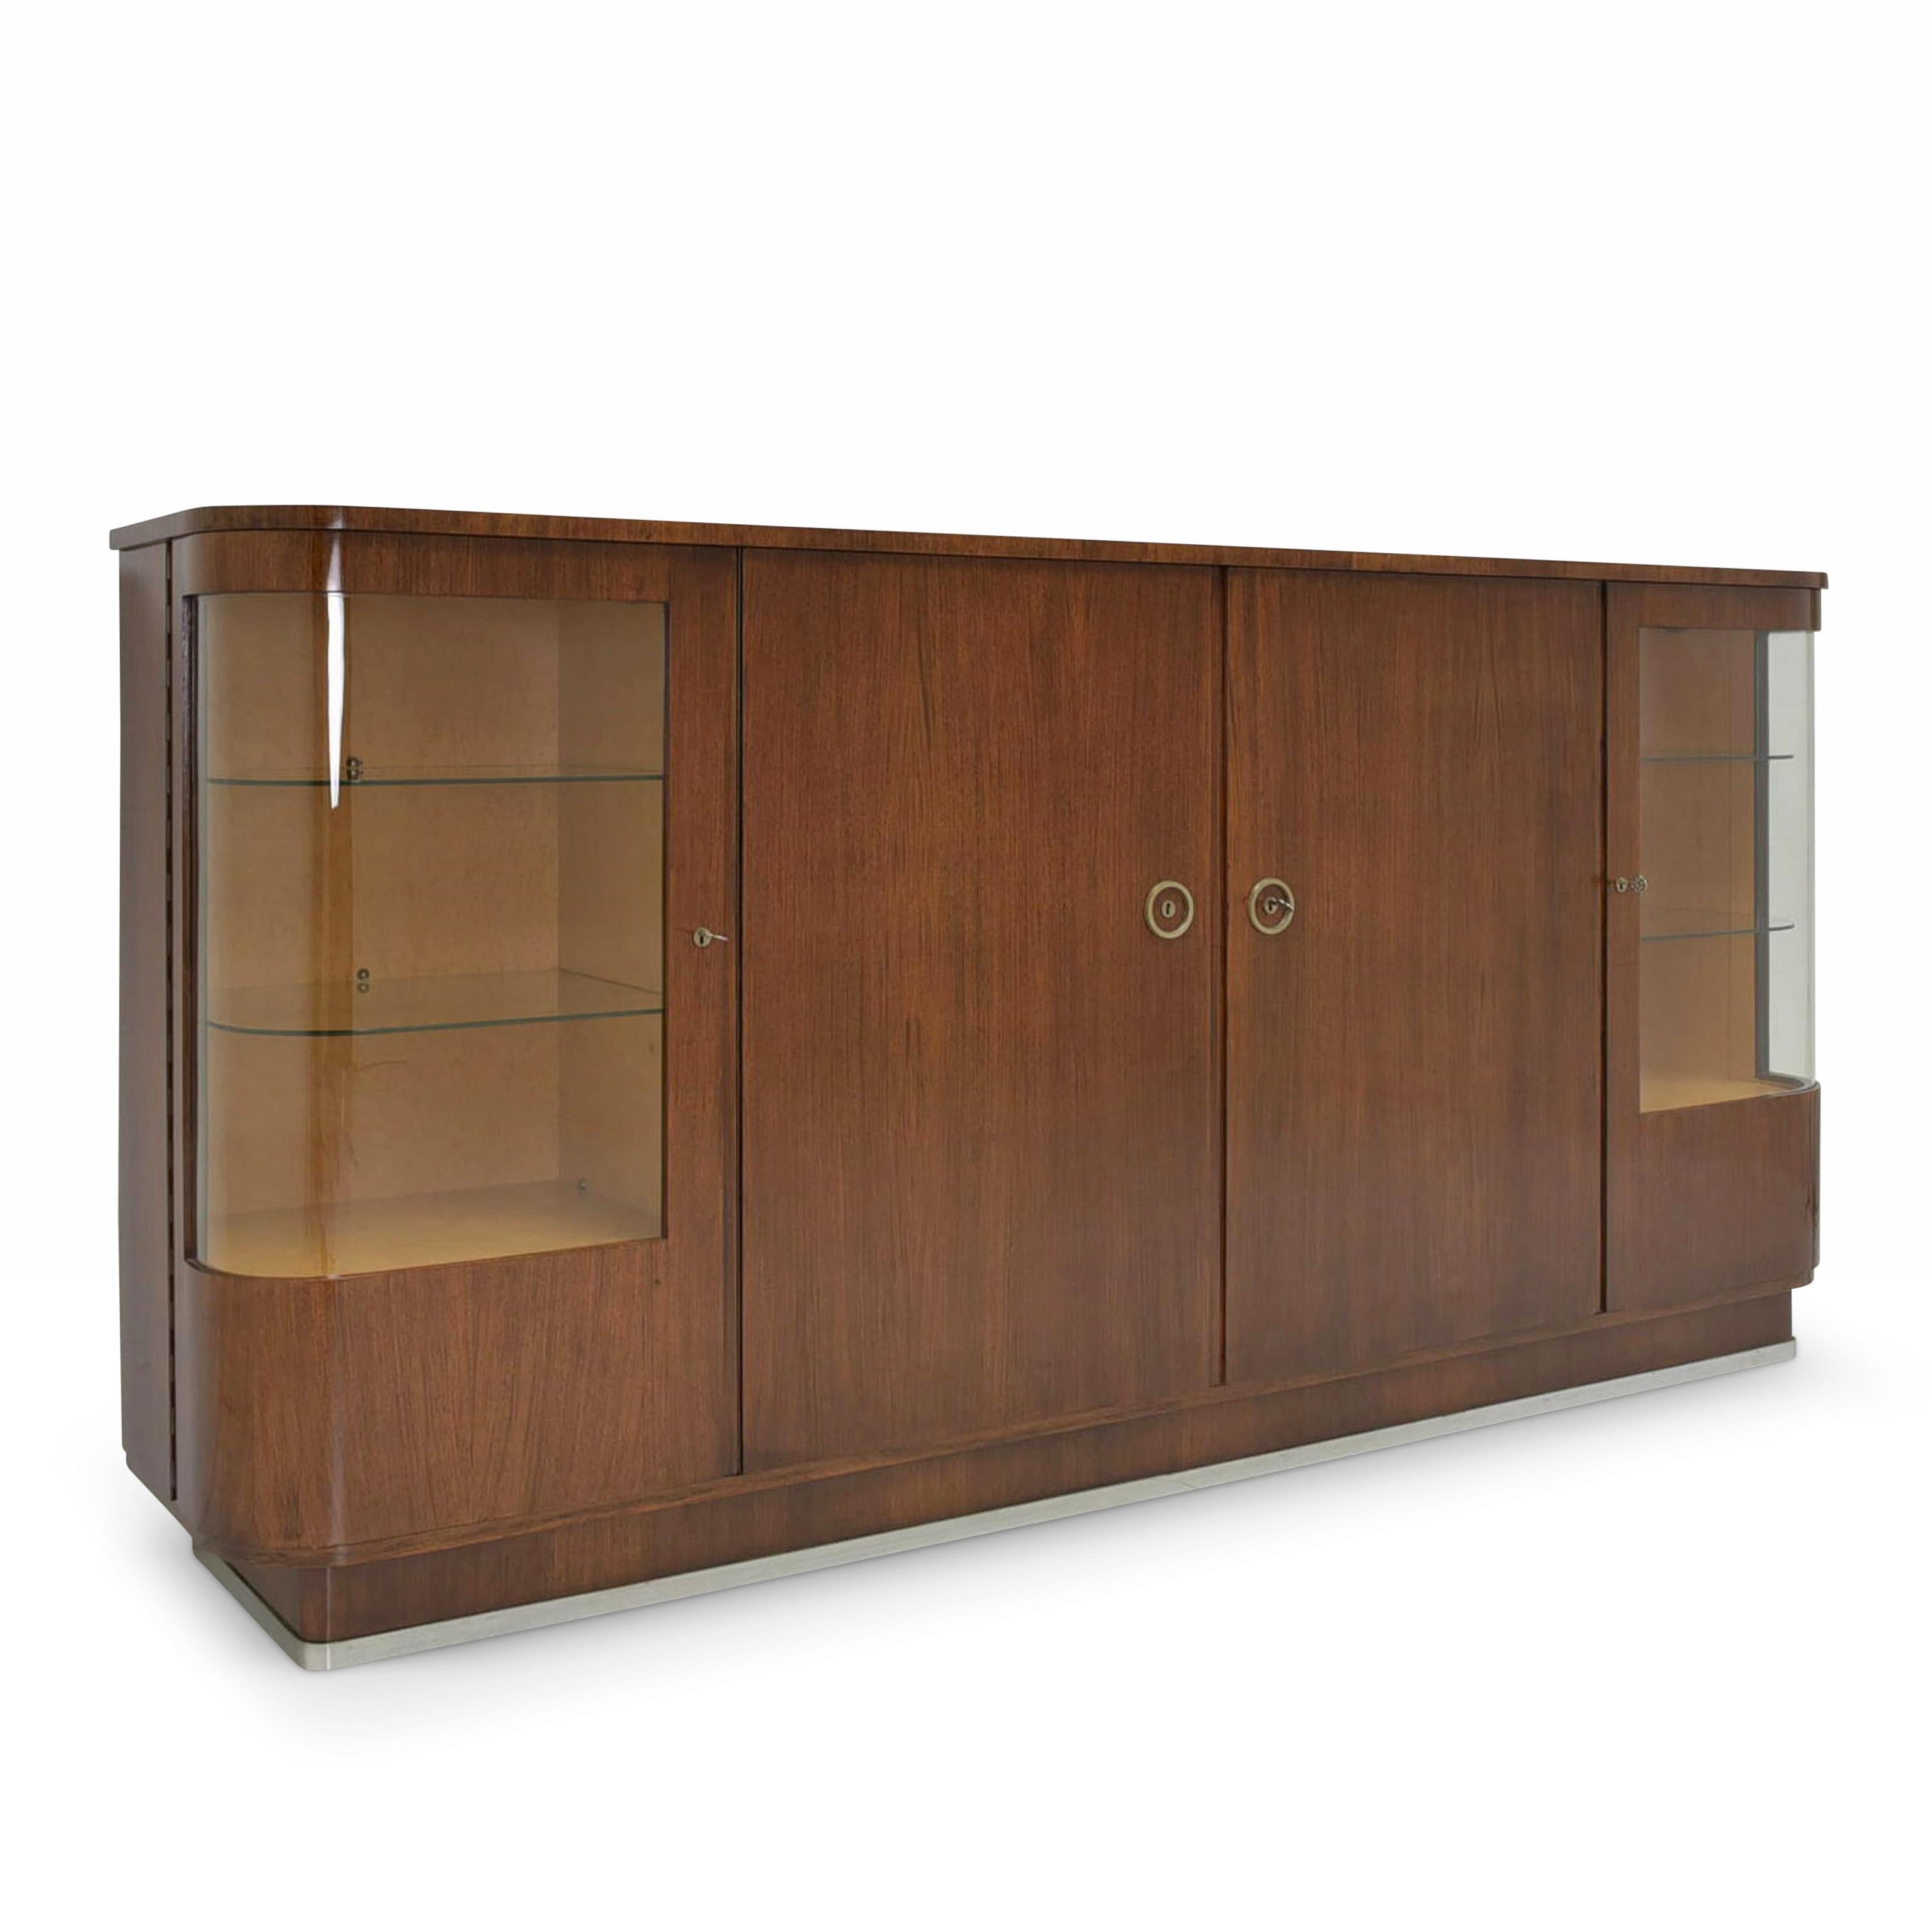 XXL showcase sideboard restored Art Deco mahogany vintage antique highboard

Features:
Mahogany veneer body, bird's eye maple interior
4-door model with 8 shelves
Very high quality processing
Outer doors with curved glass
Base with metal